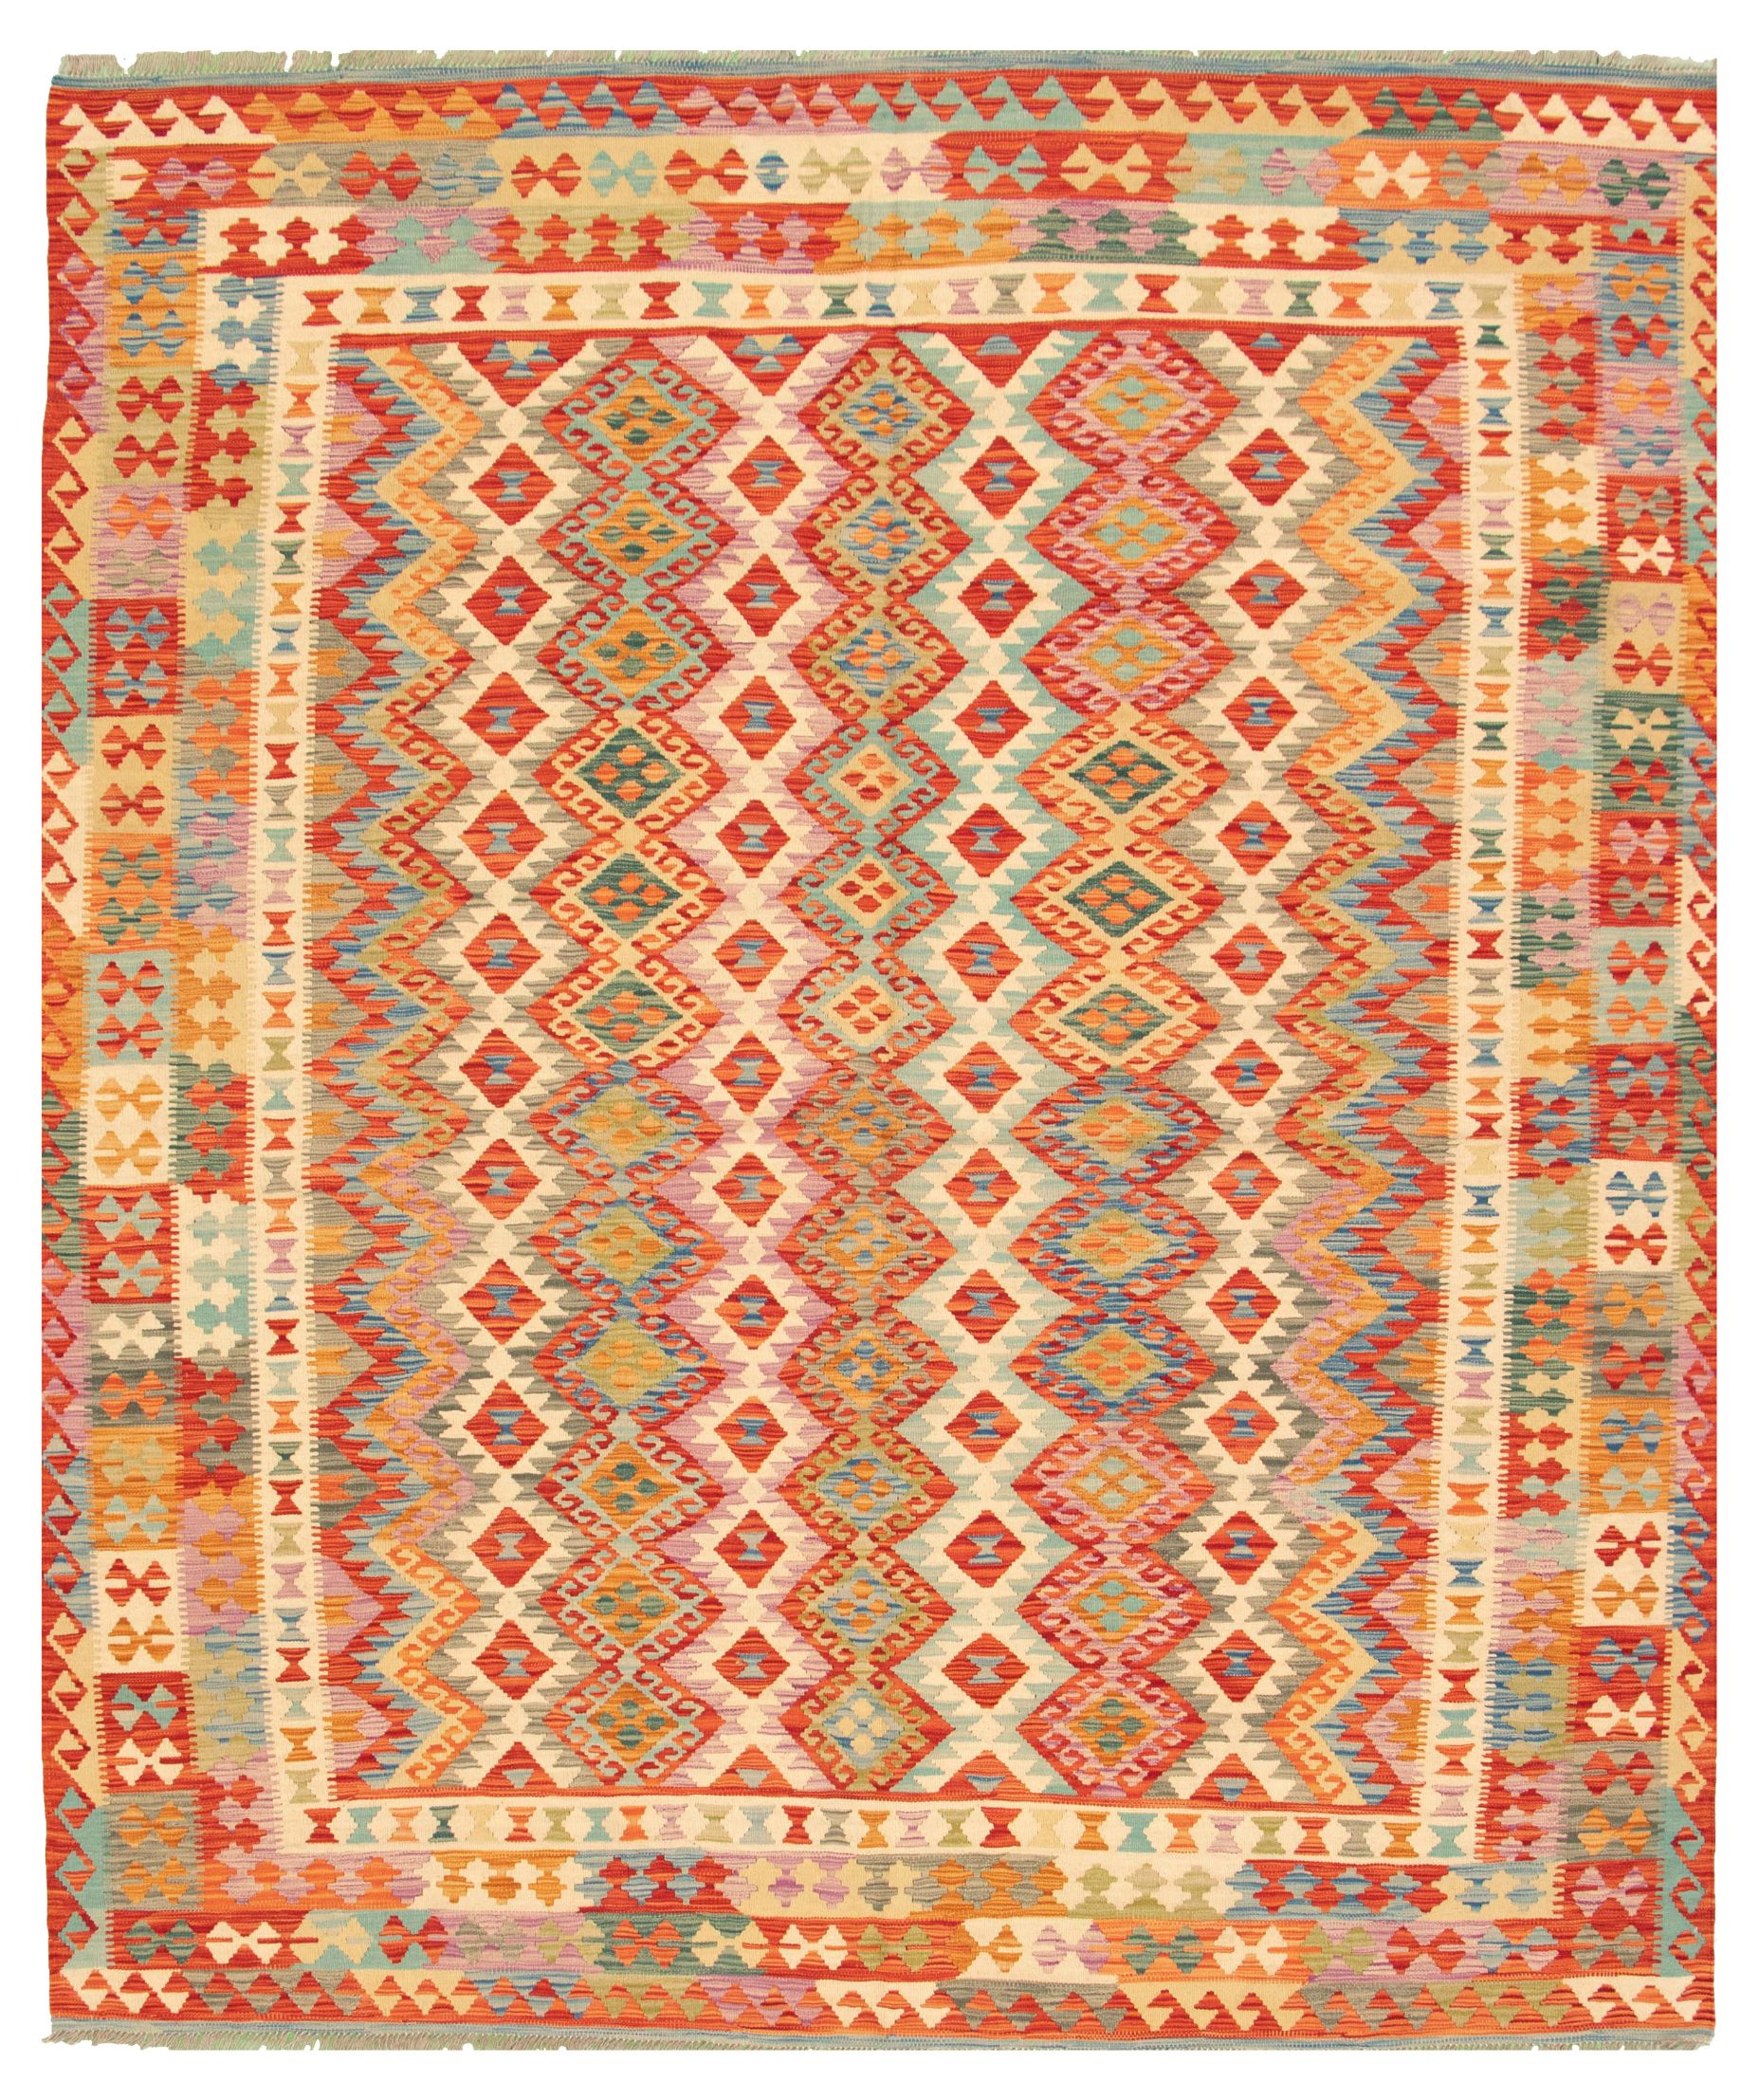 Hand woven Bold and Colorful  Ivory, Red Wool Kilim 8'4" x 9'10" Size: 8'4" x 9'10"  